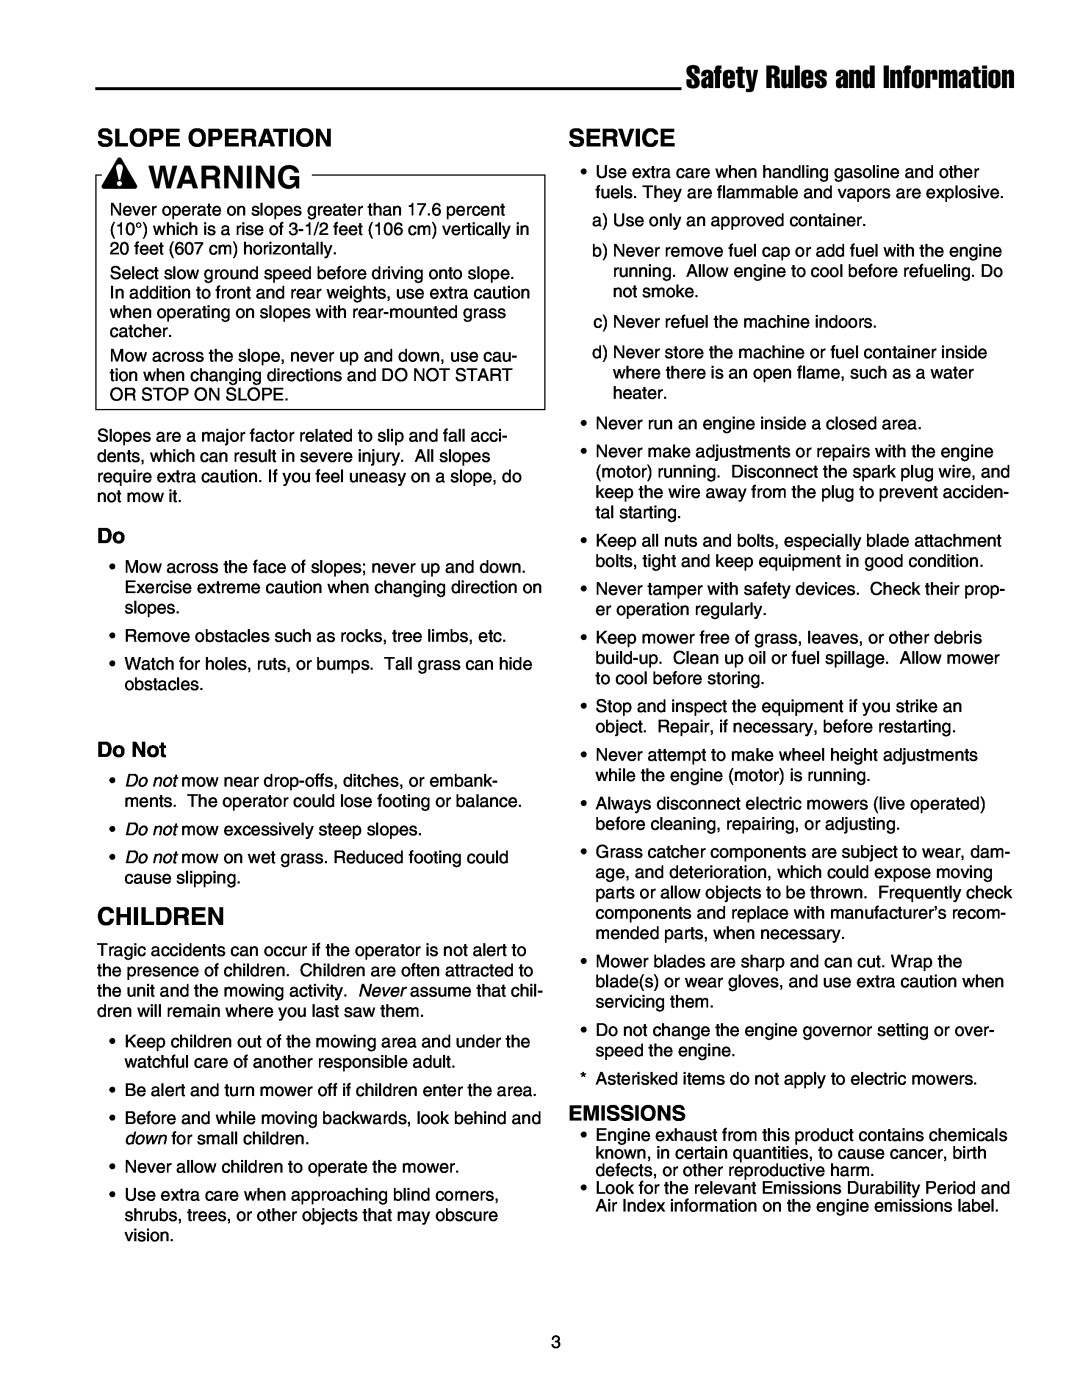 Briggs & Stratton FB13250BS manual Safety Rules and Information, Slope Operation, Children, Service, Do Not, Emissions 